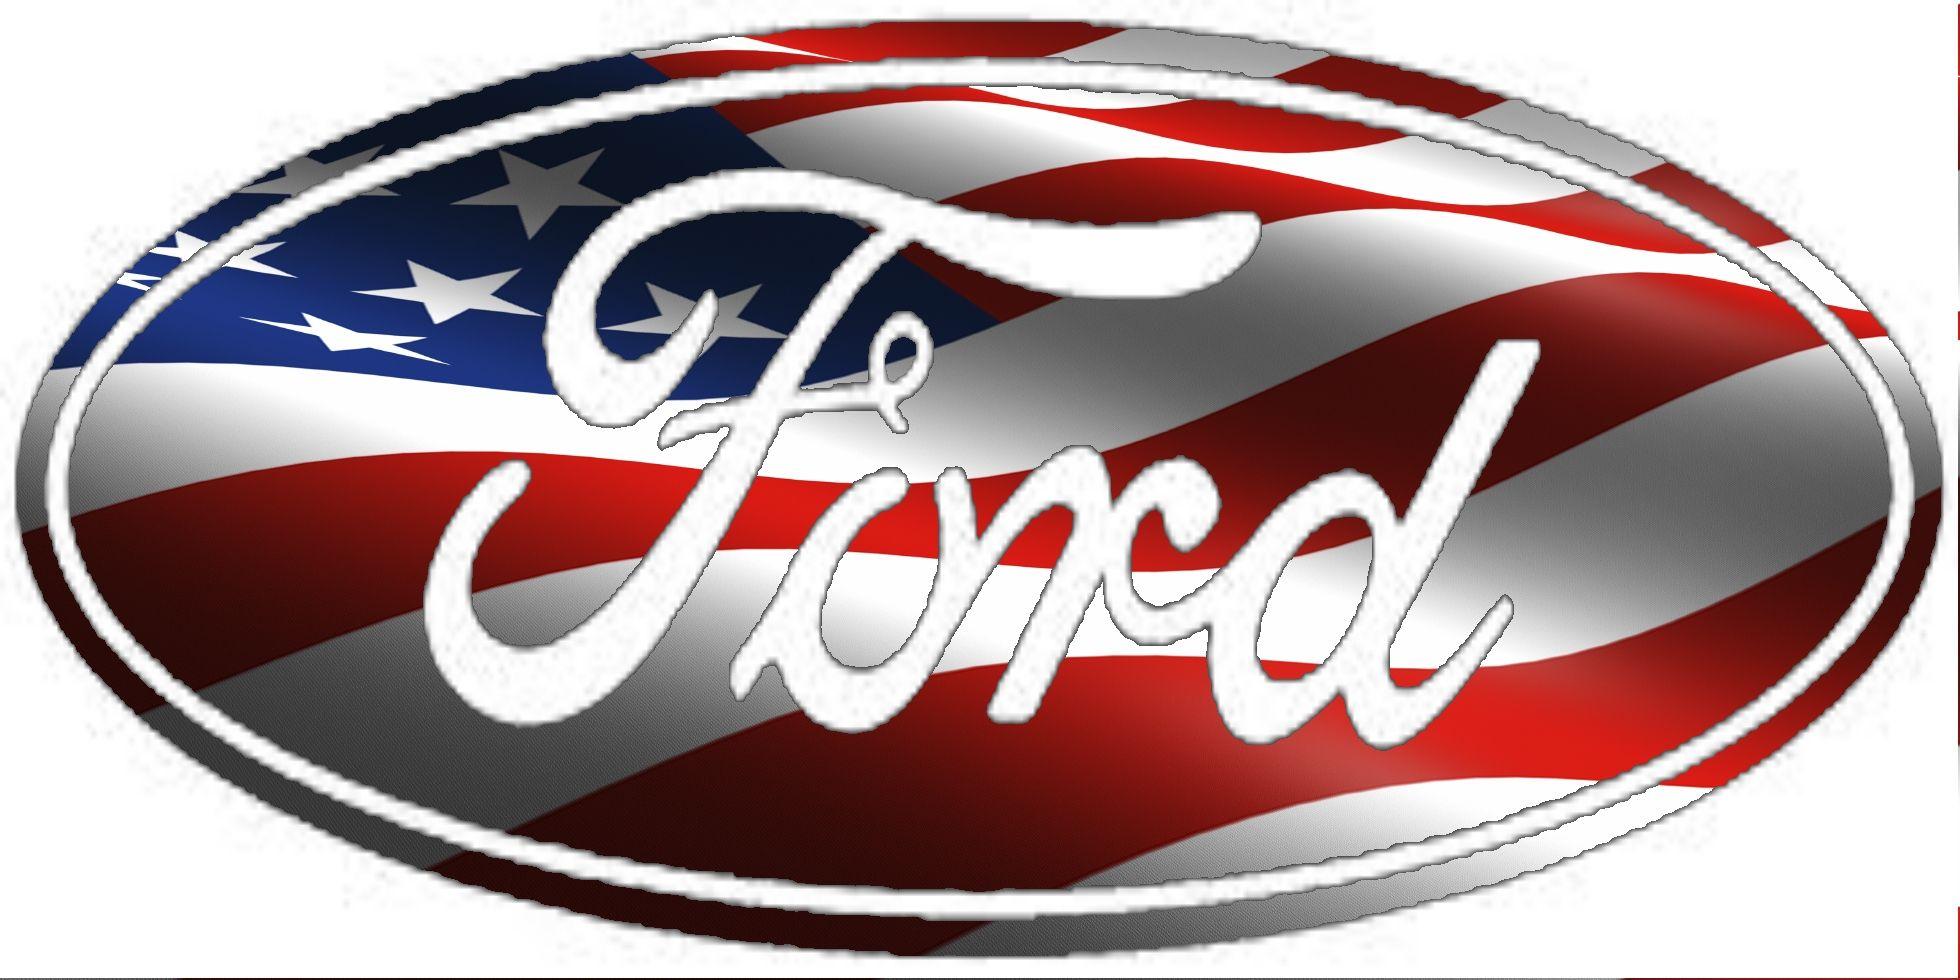 American Flag Ford Logo - Ford badge overlays